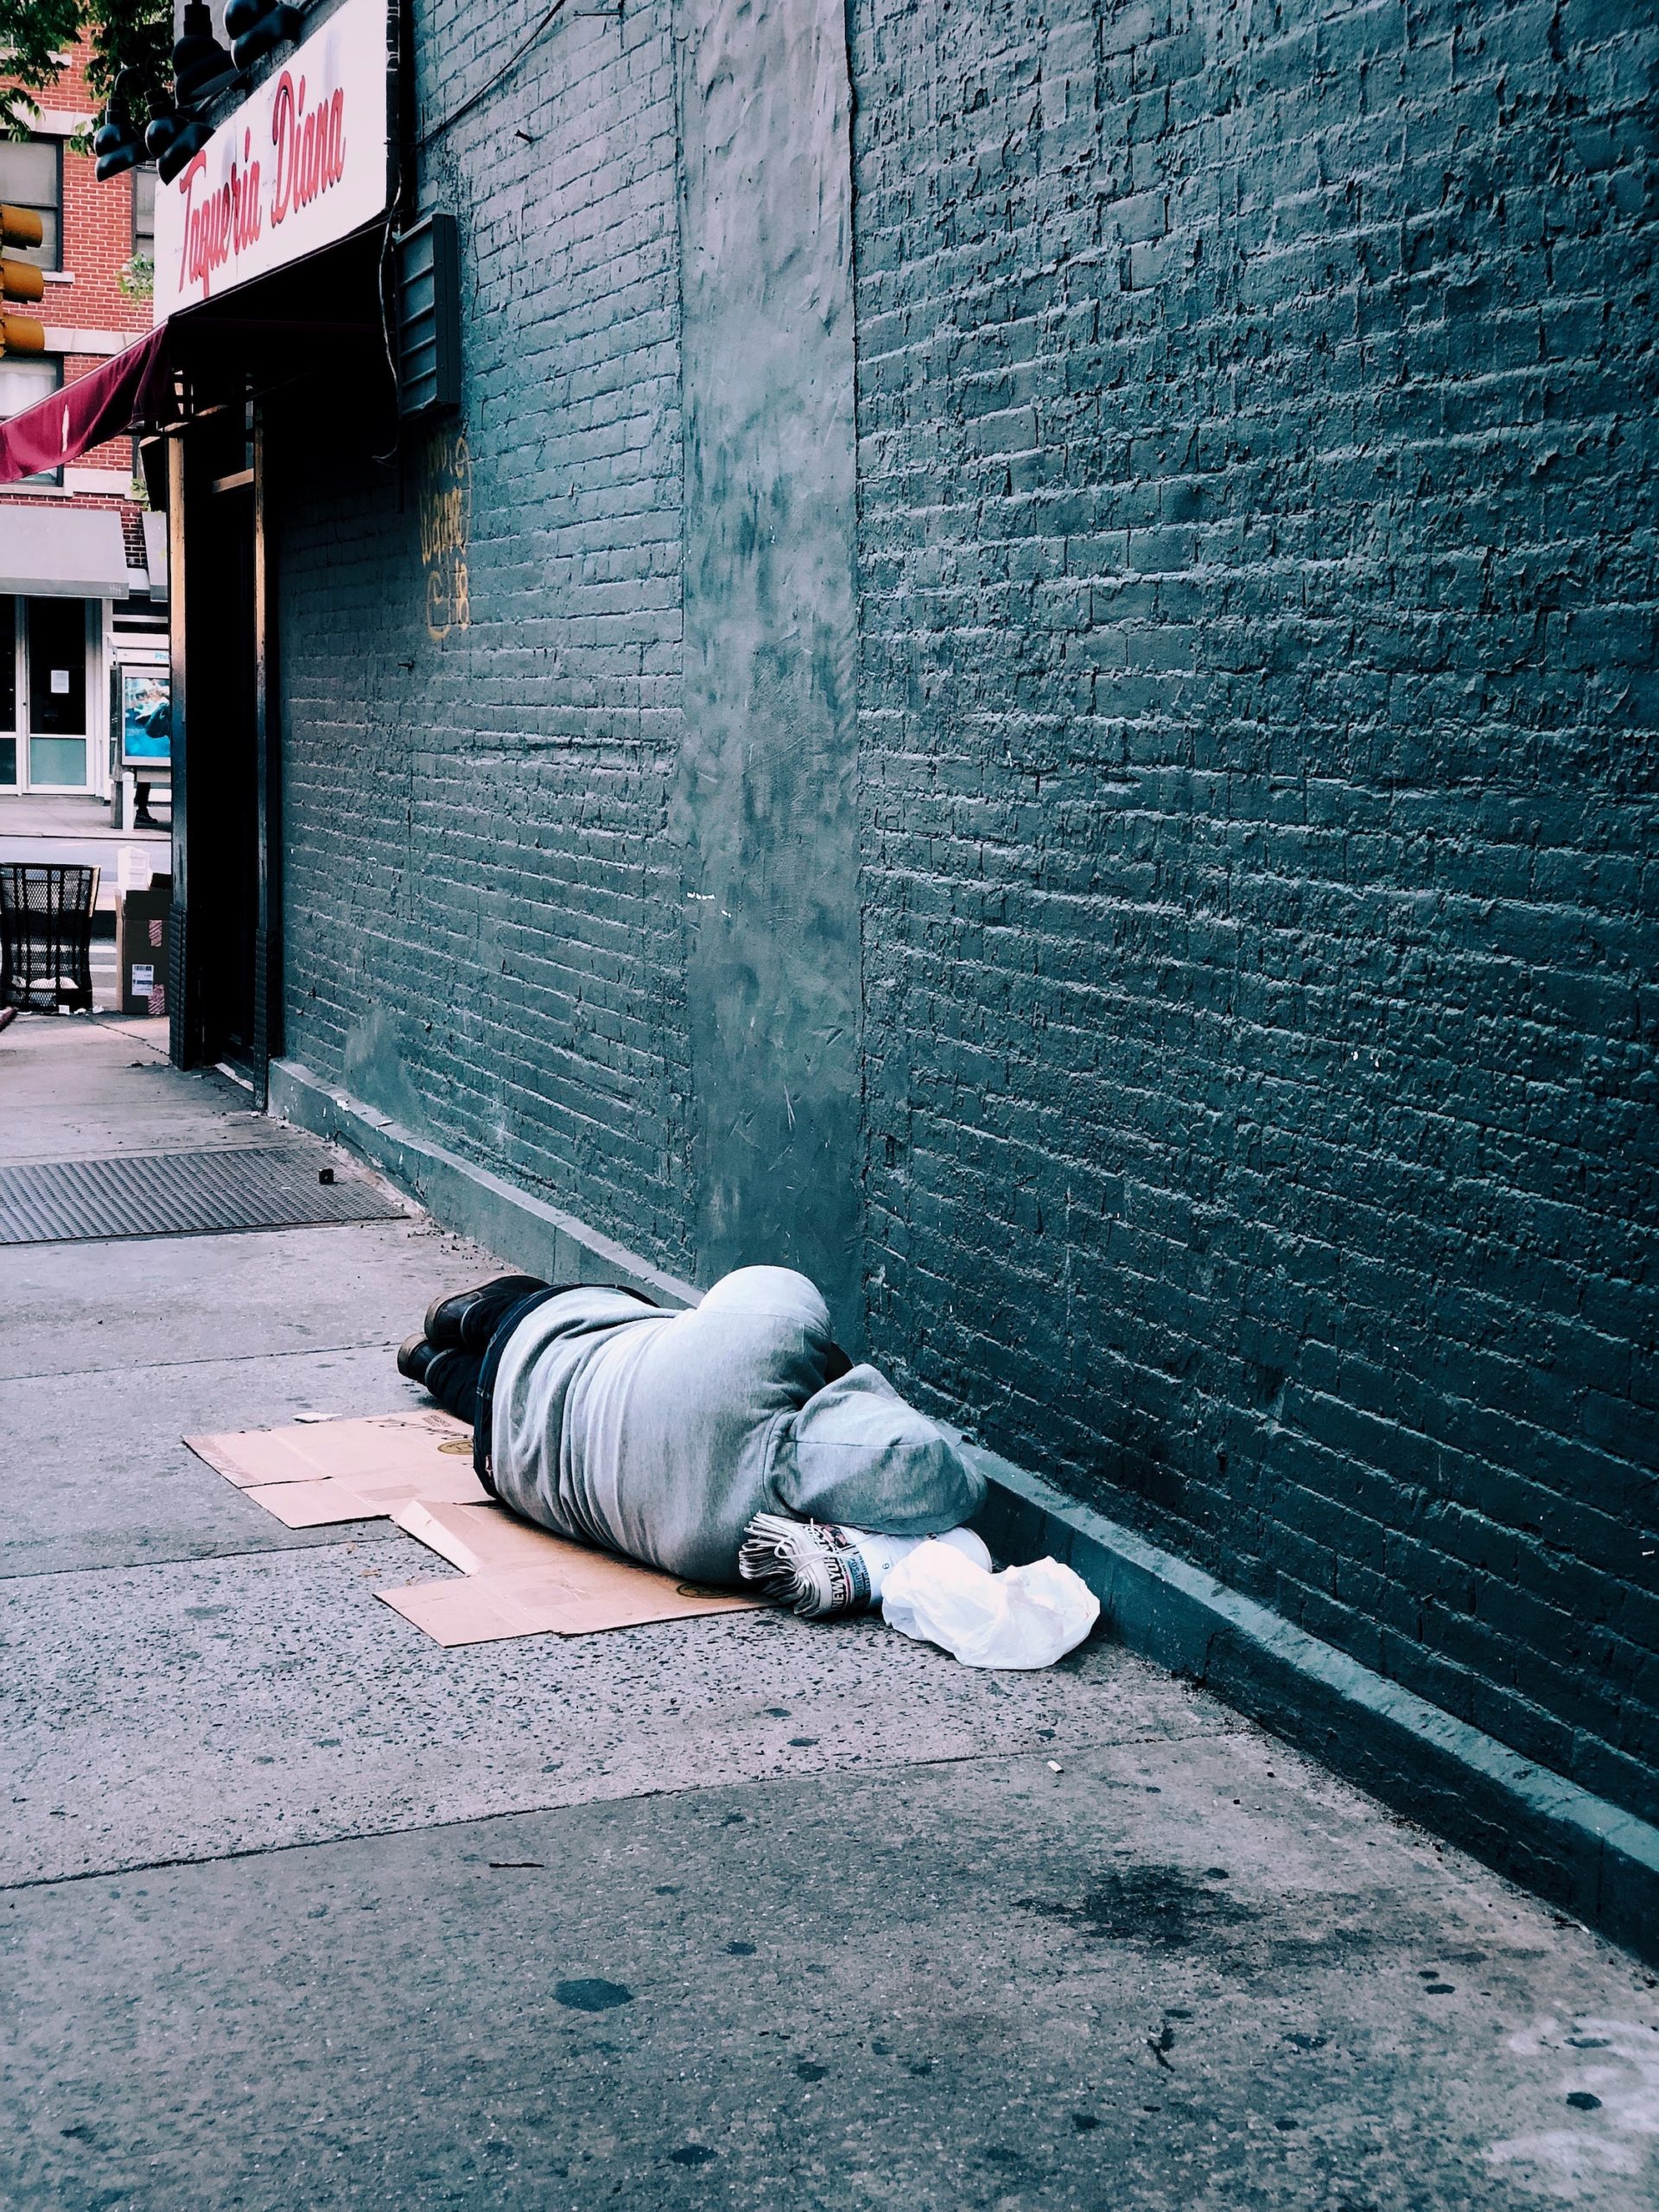 Do You Have A Fear Of Being Homeless?